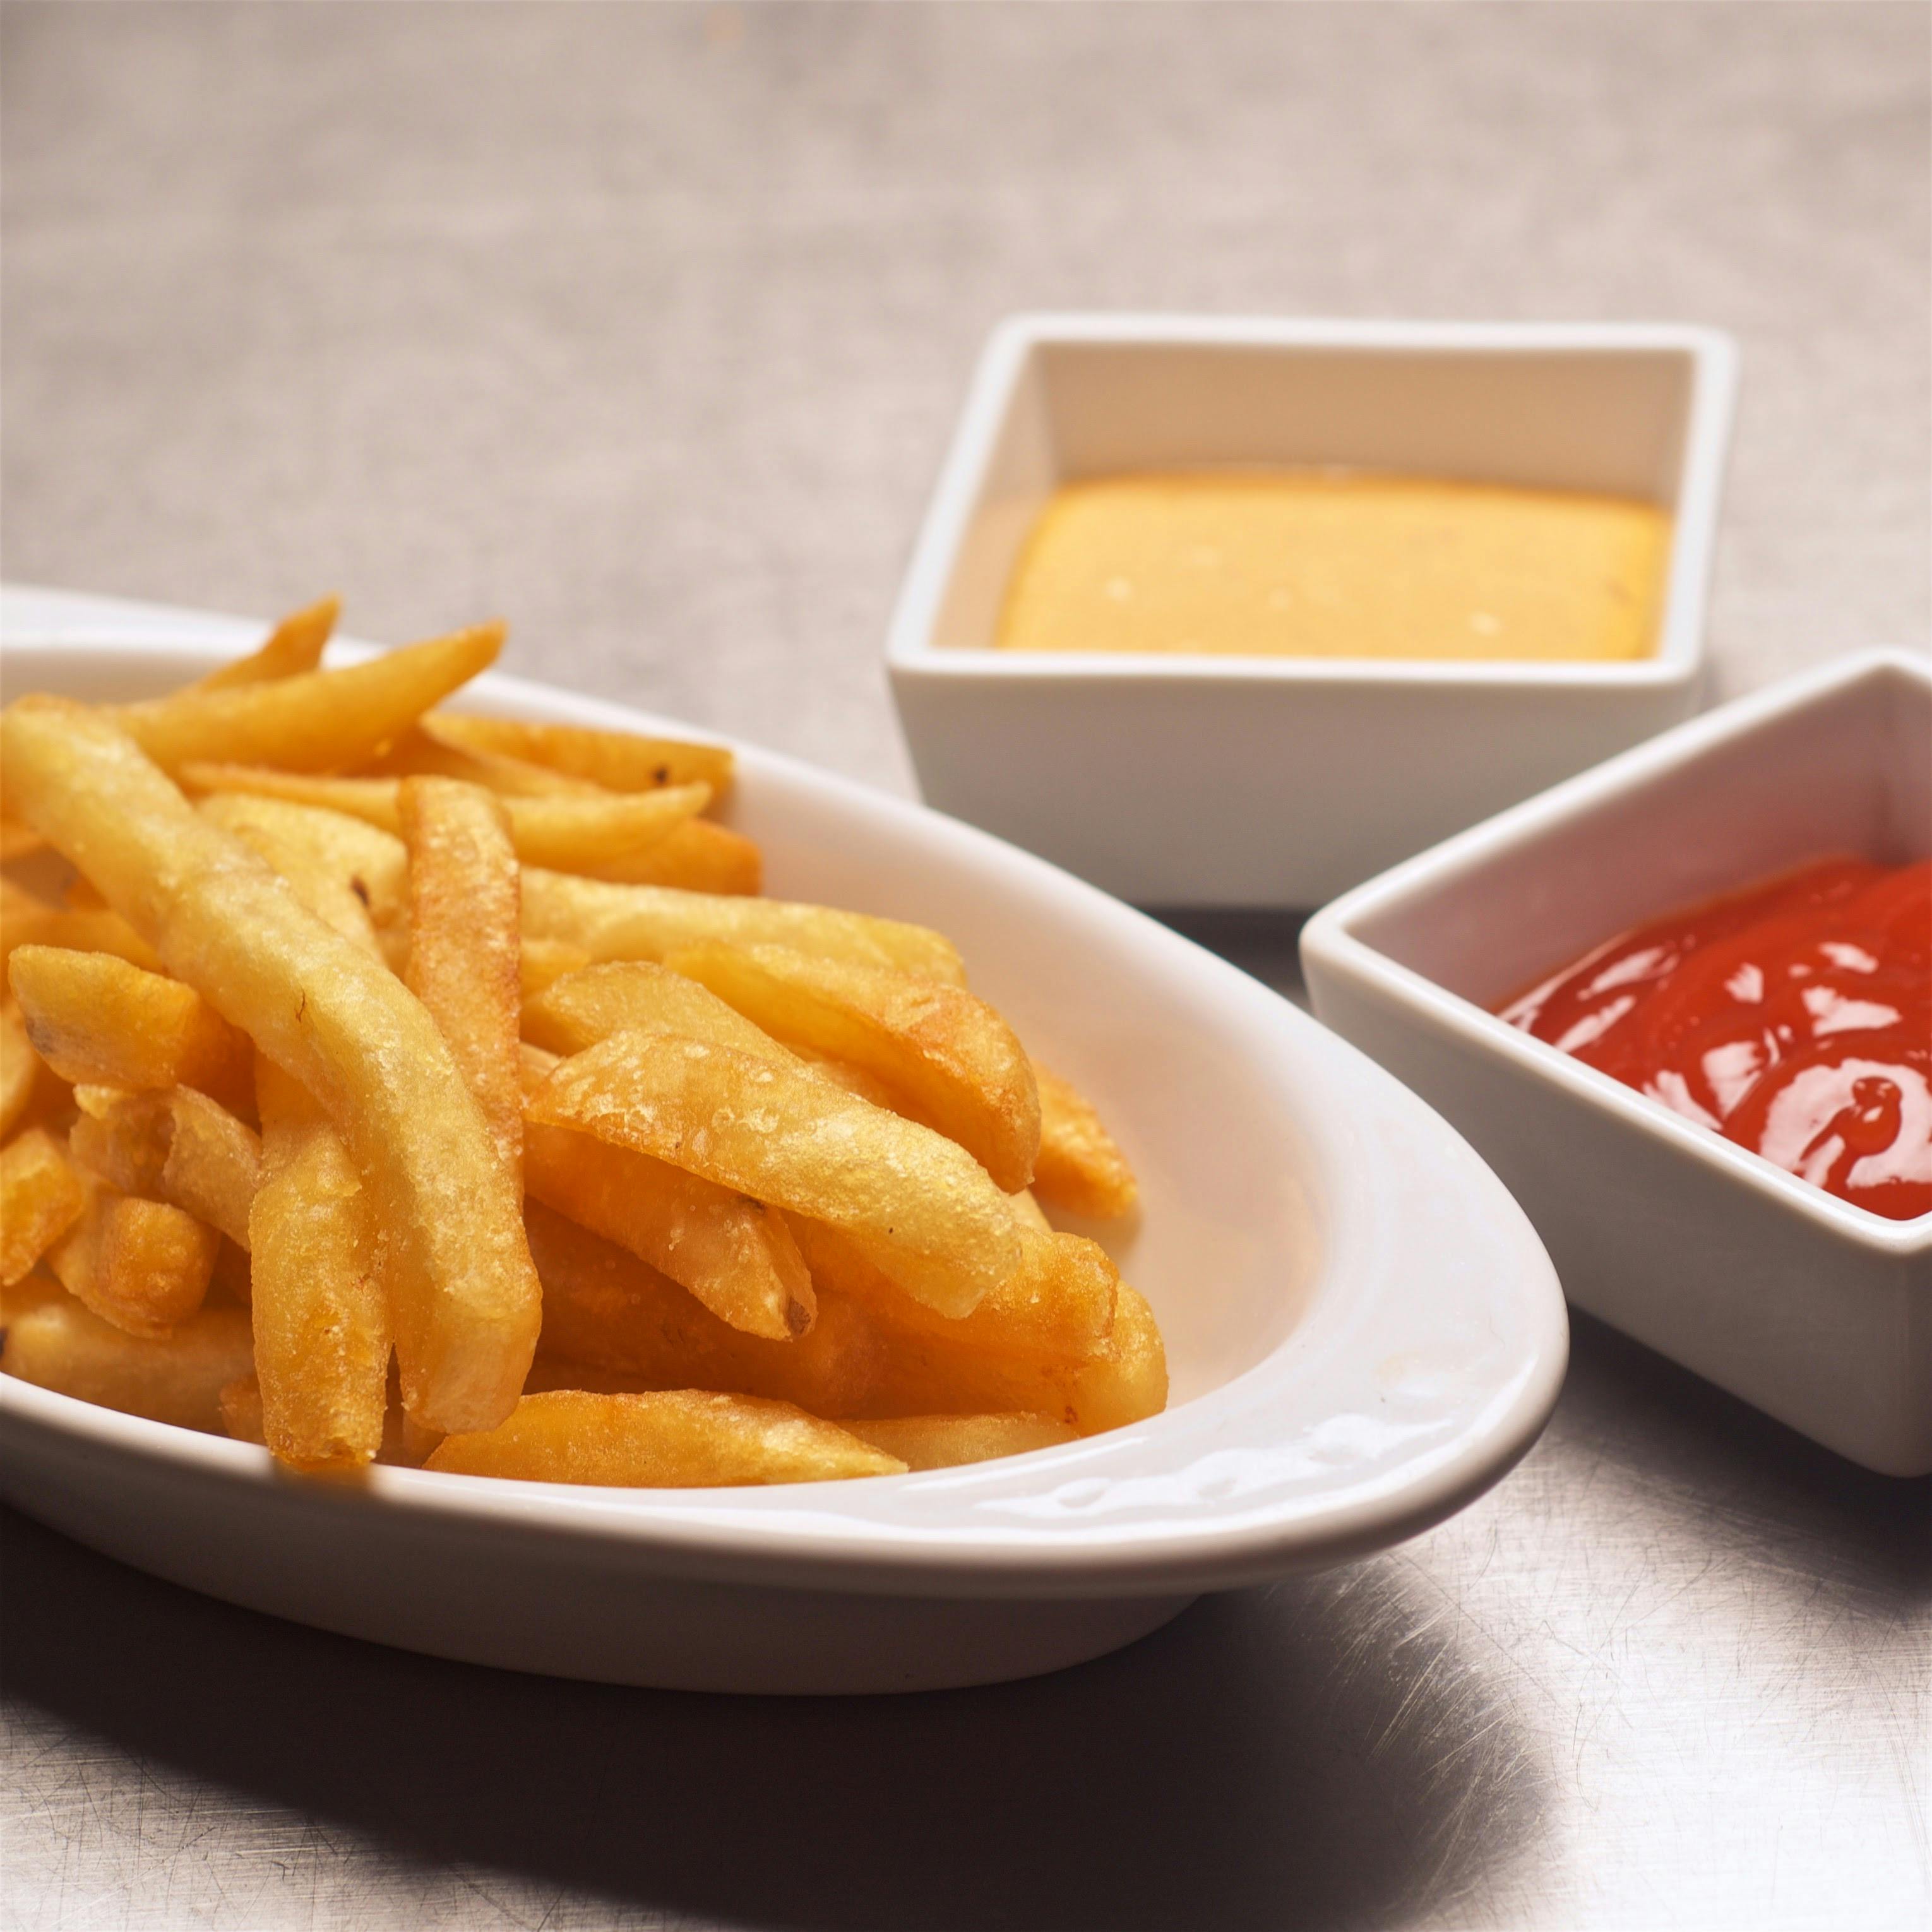 Crispy French Fries and ask for melted cheddar! Papas a la francesa